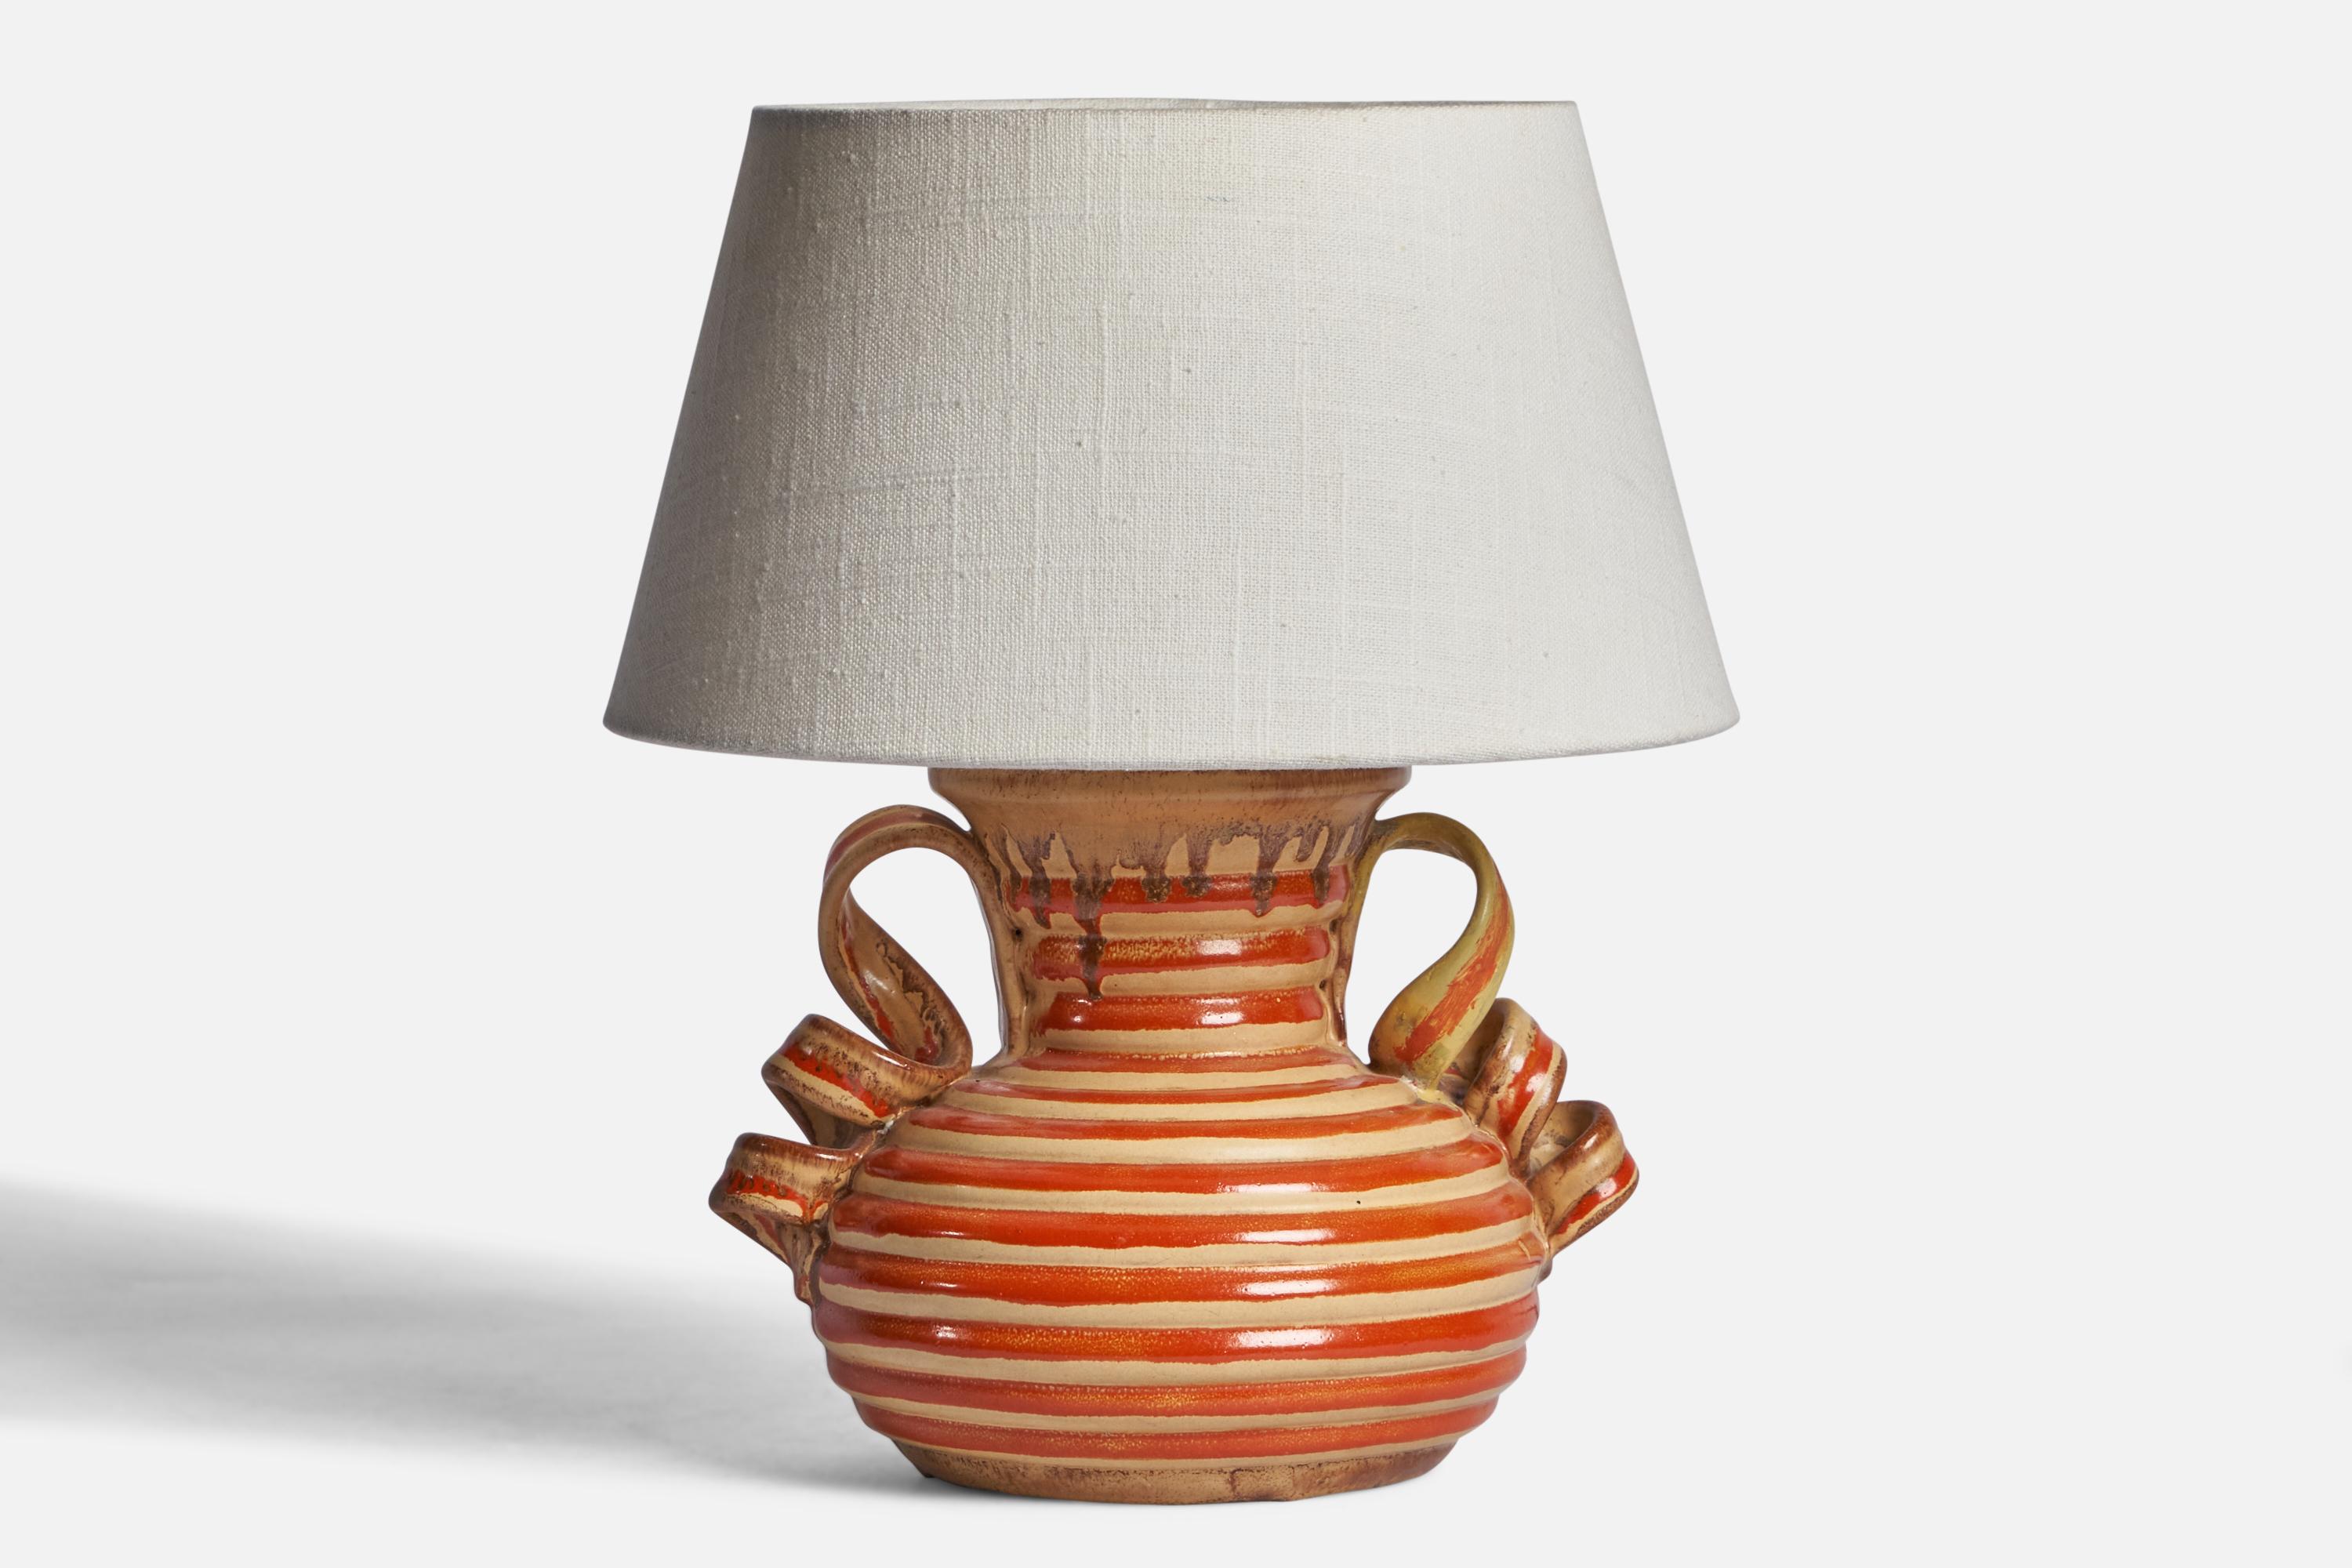 A red and beige-glazed earthenware table lamp designed by Anna-Lisa Thomson and produced by Upsala Ekeby, Sweden, 1930s.

Dimensions of Lamp (inches): 9” H x 8.25” Diameter
Dimensions of Shade (inches): 7” Top Diameter x 10” Bottom Diameter x